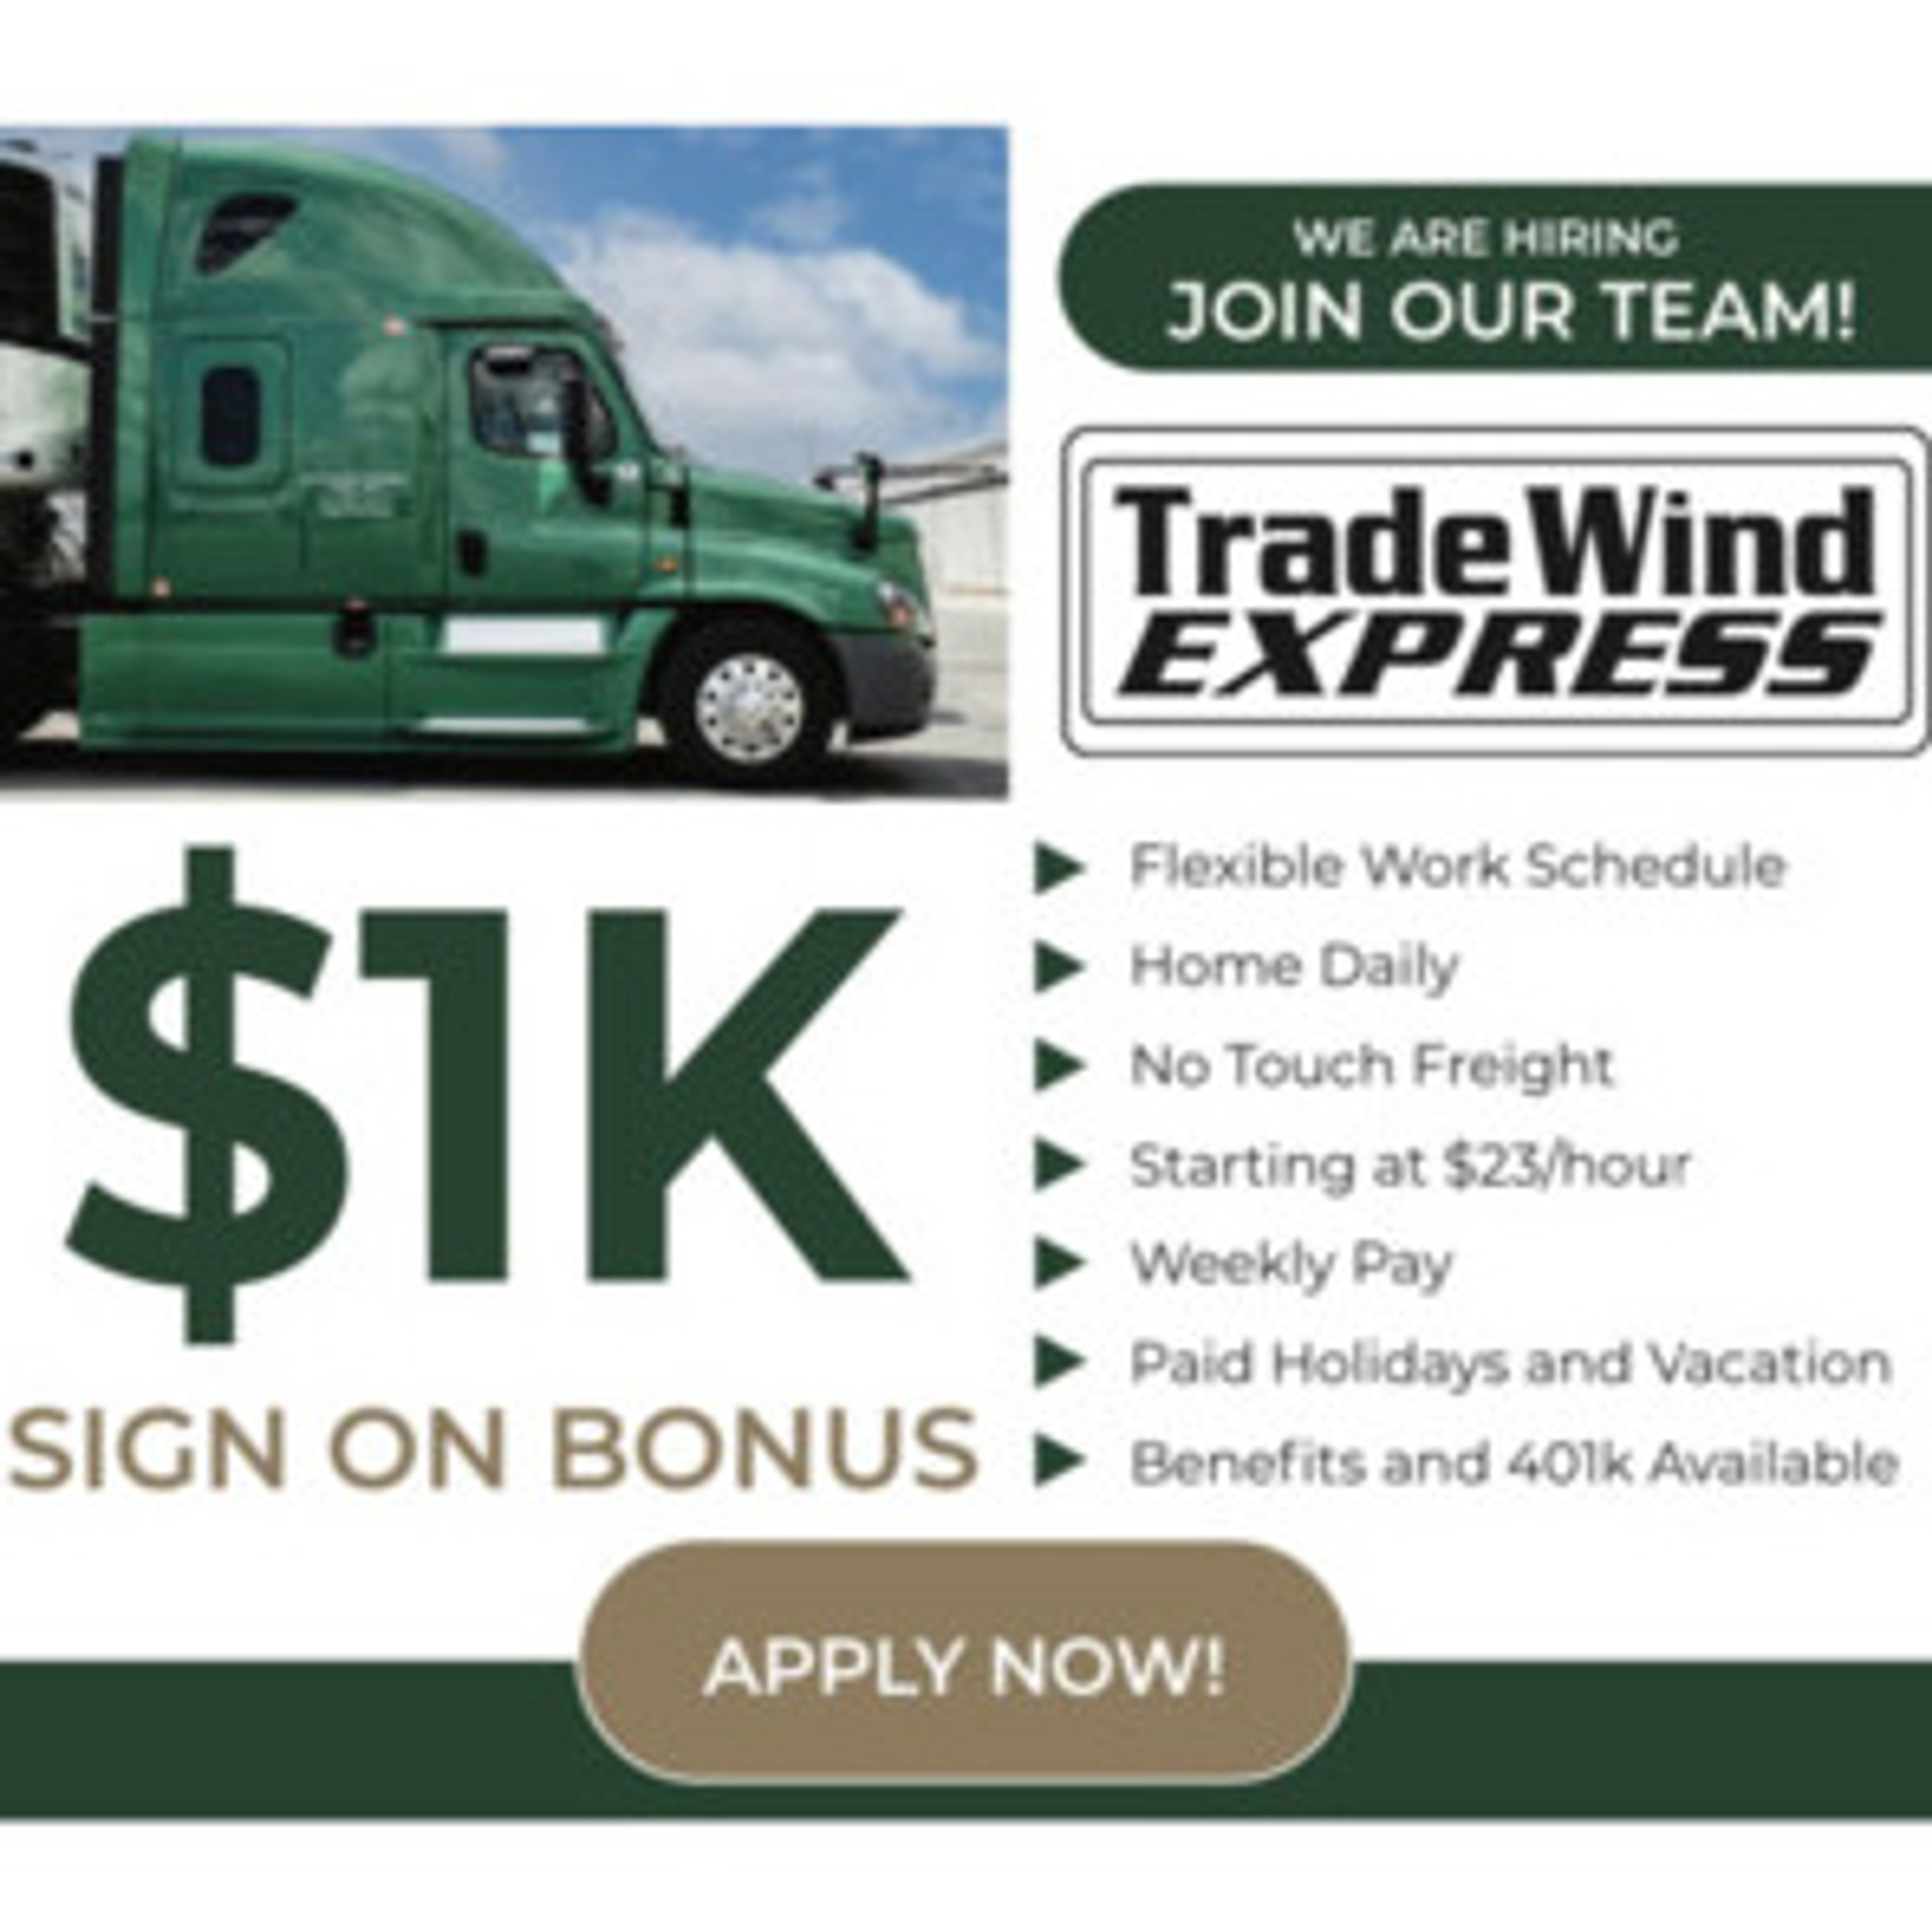 Trade Wind Express is seeking local drivers! HOME DAILY!